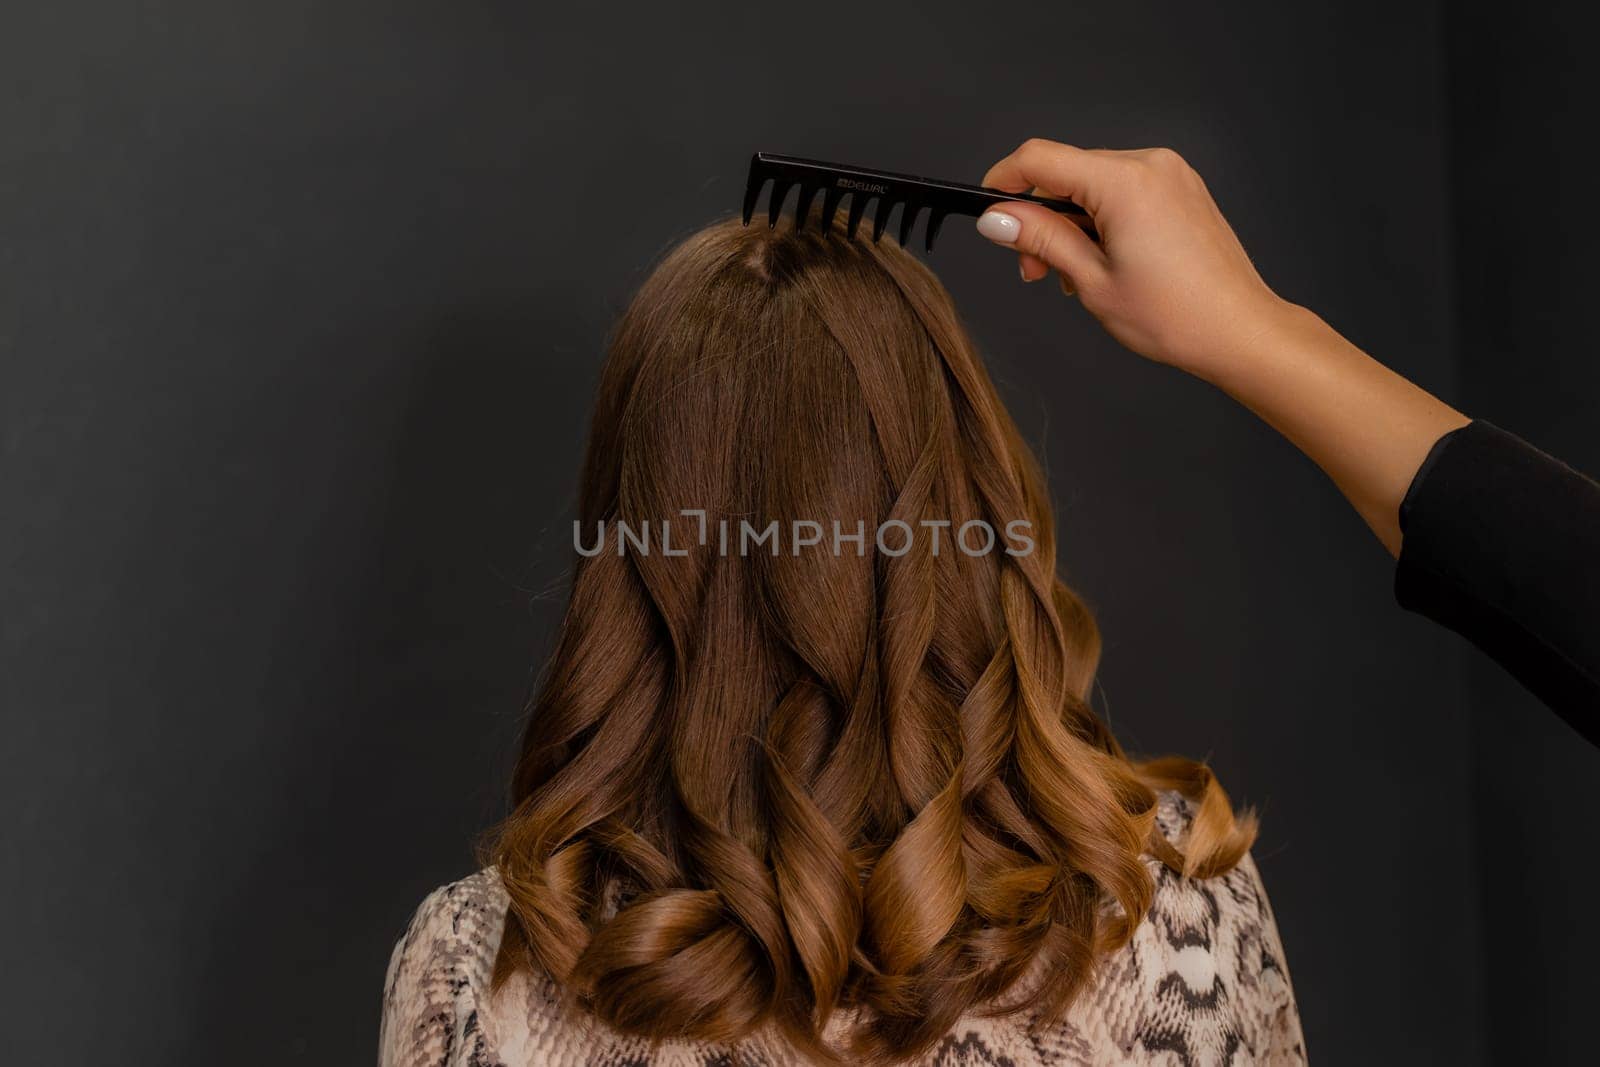 A woman with long brown hair is getting her hair brushed by another person. The brush is black and the woman's hair is curly